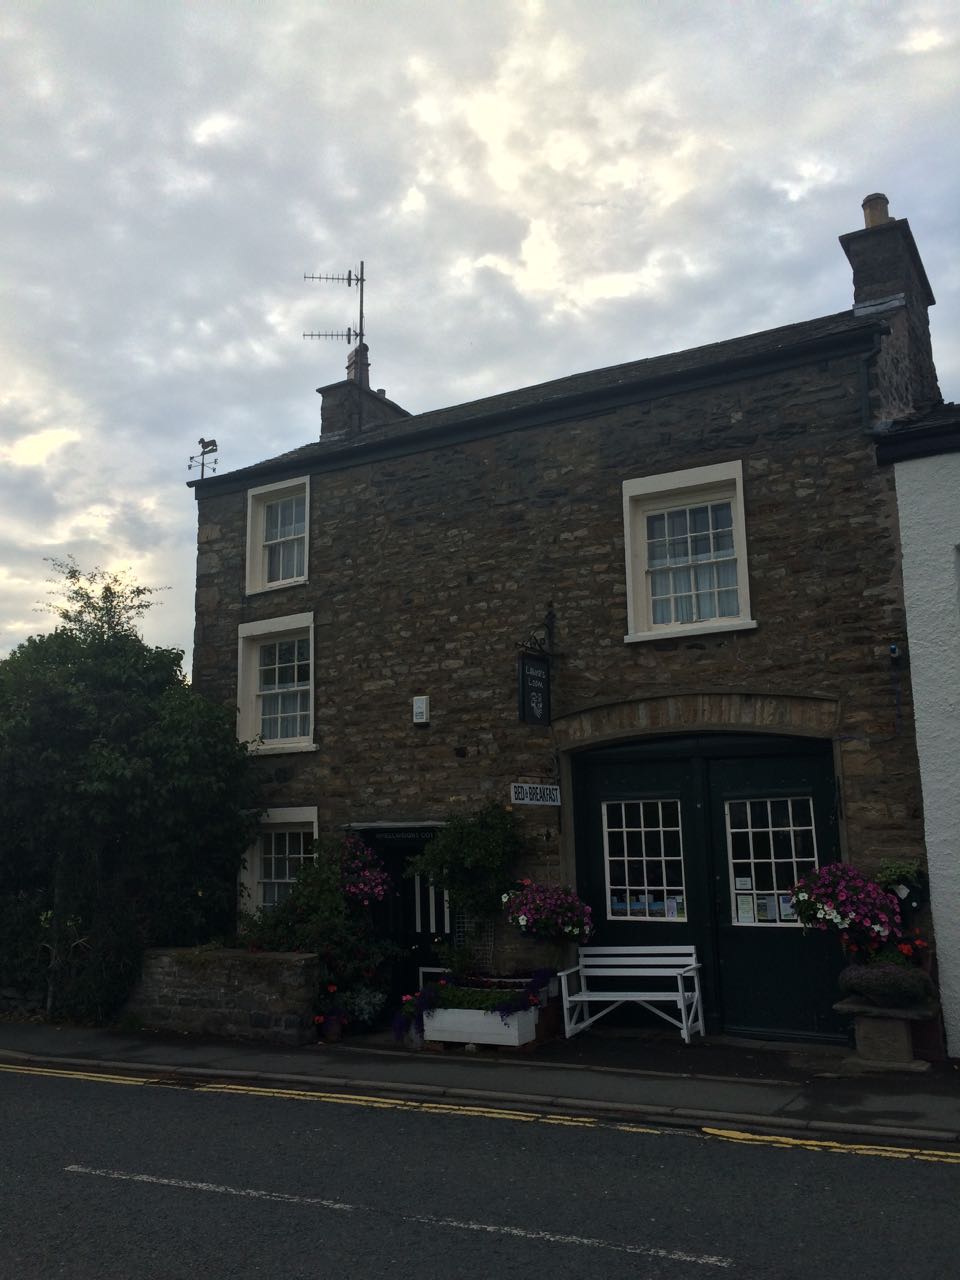 Wheelwhright Cottage in Sedbergh - where we spent the night